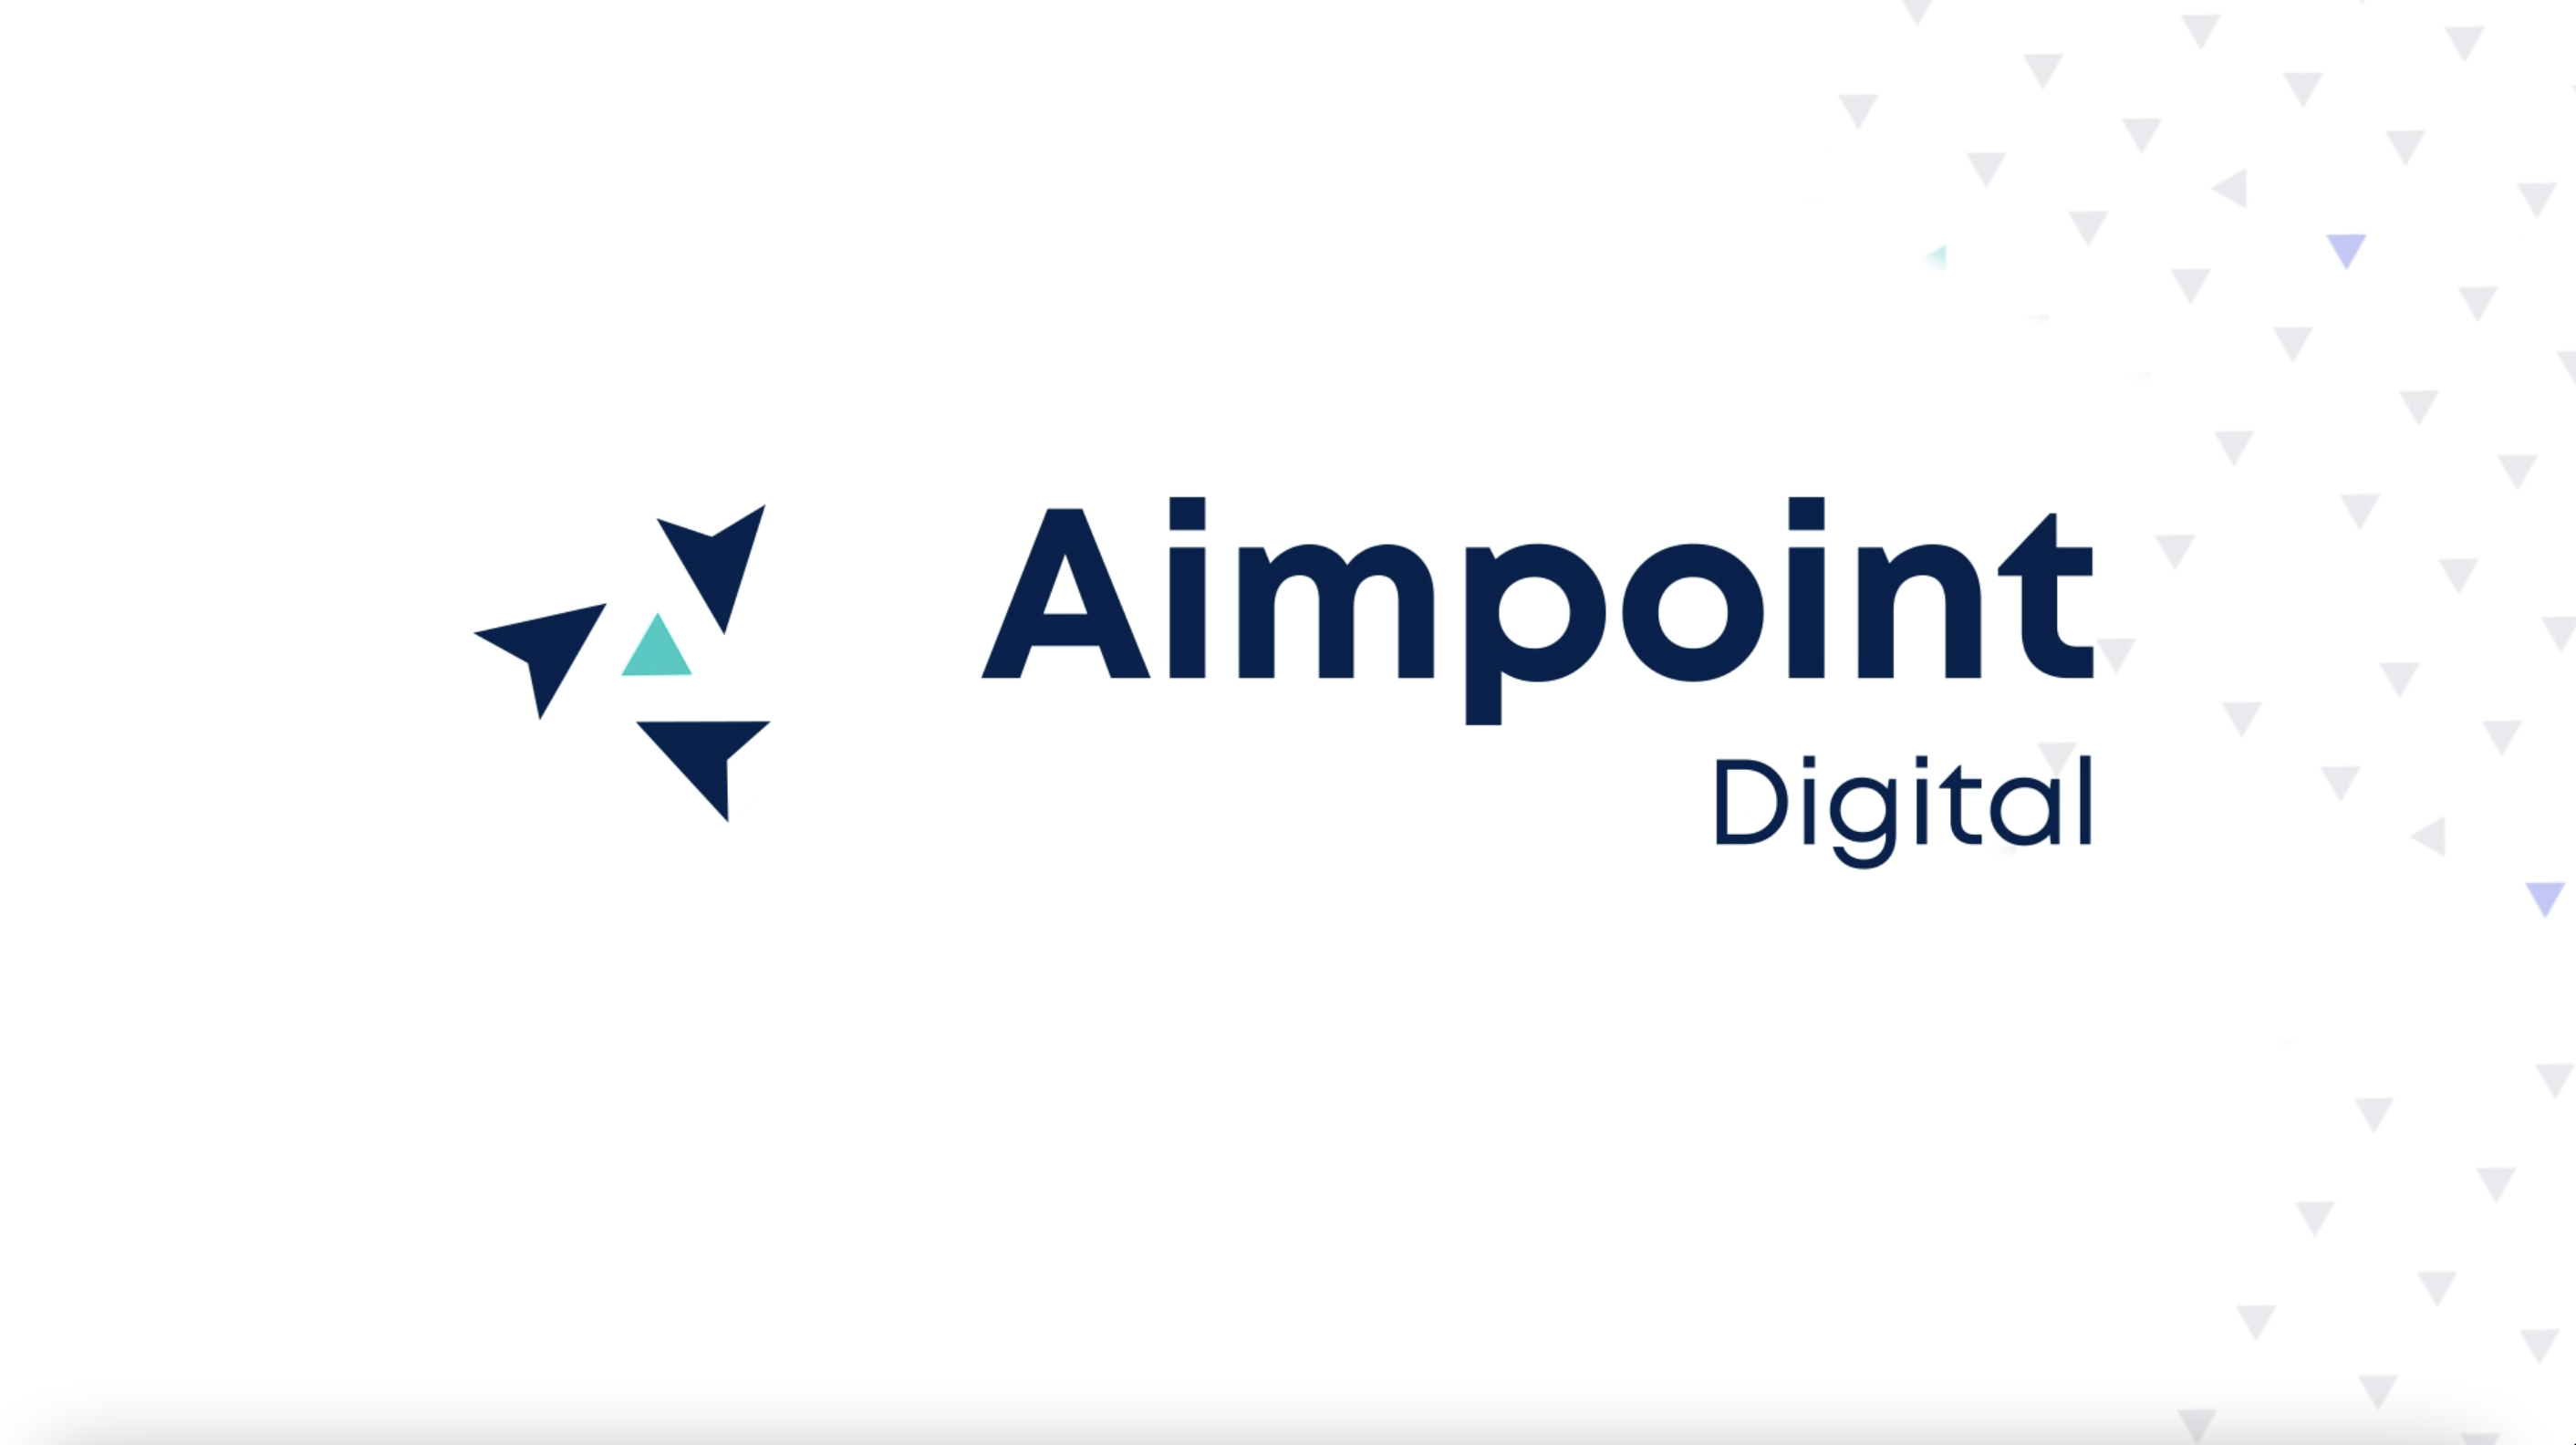 About Aimpoint Digital | Advanced Data & Analytics Consulting